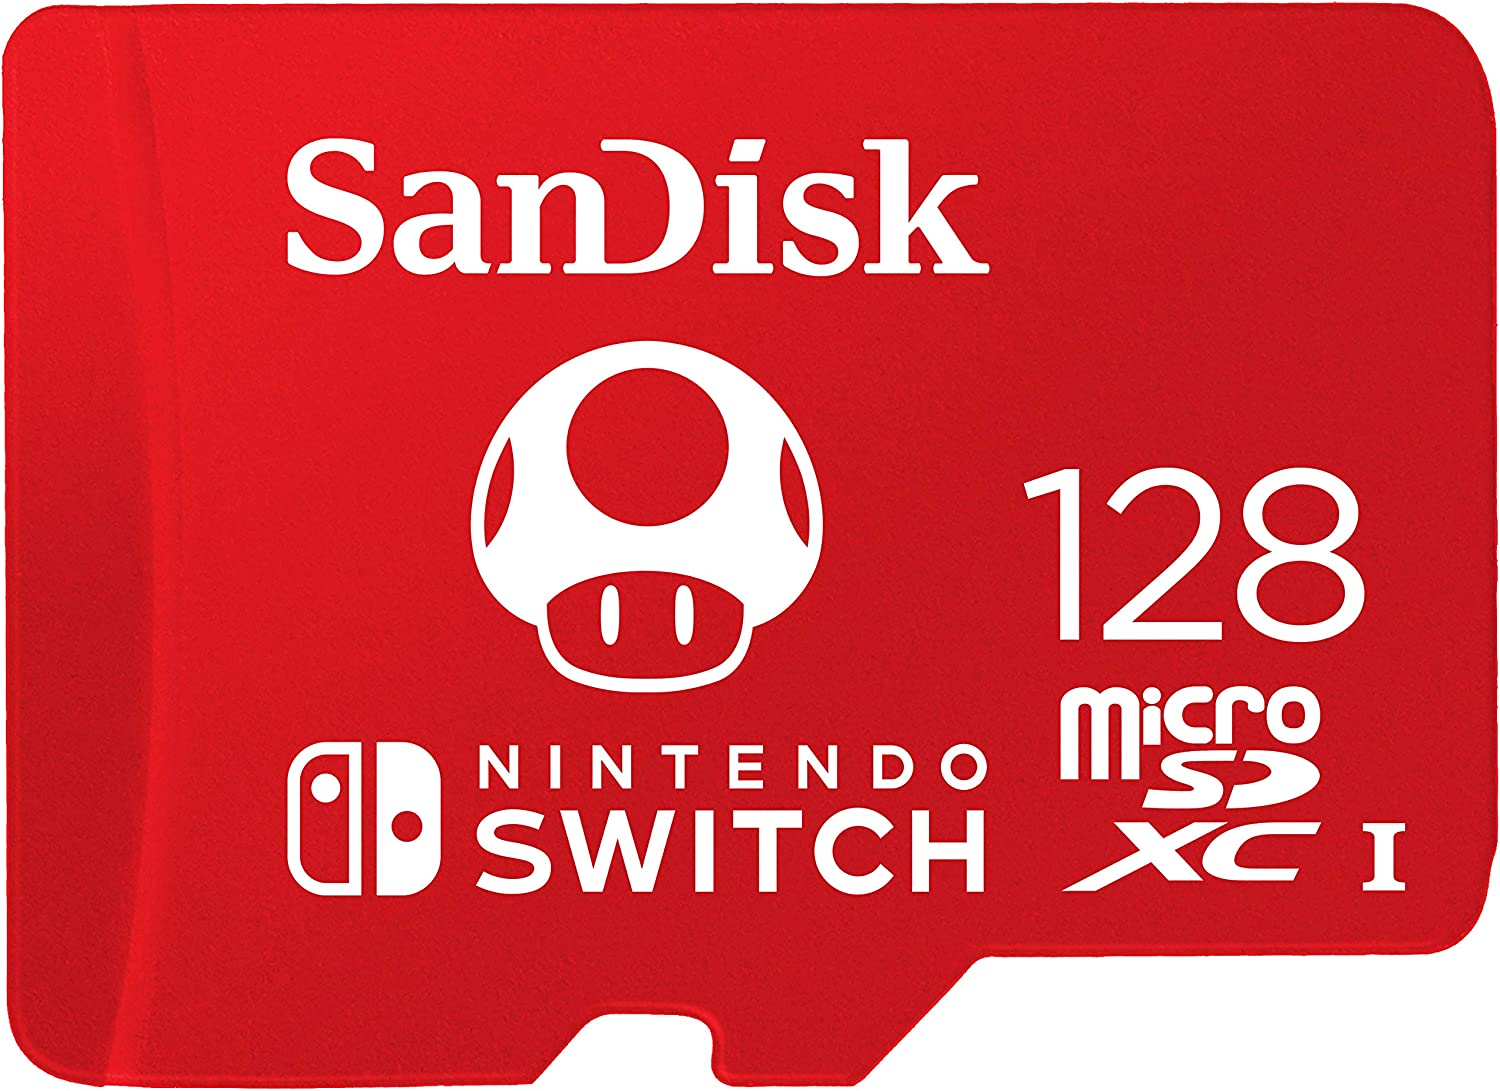 128GB microSD card licensed for the Nintendo Switch.